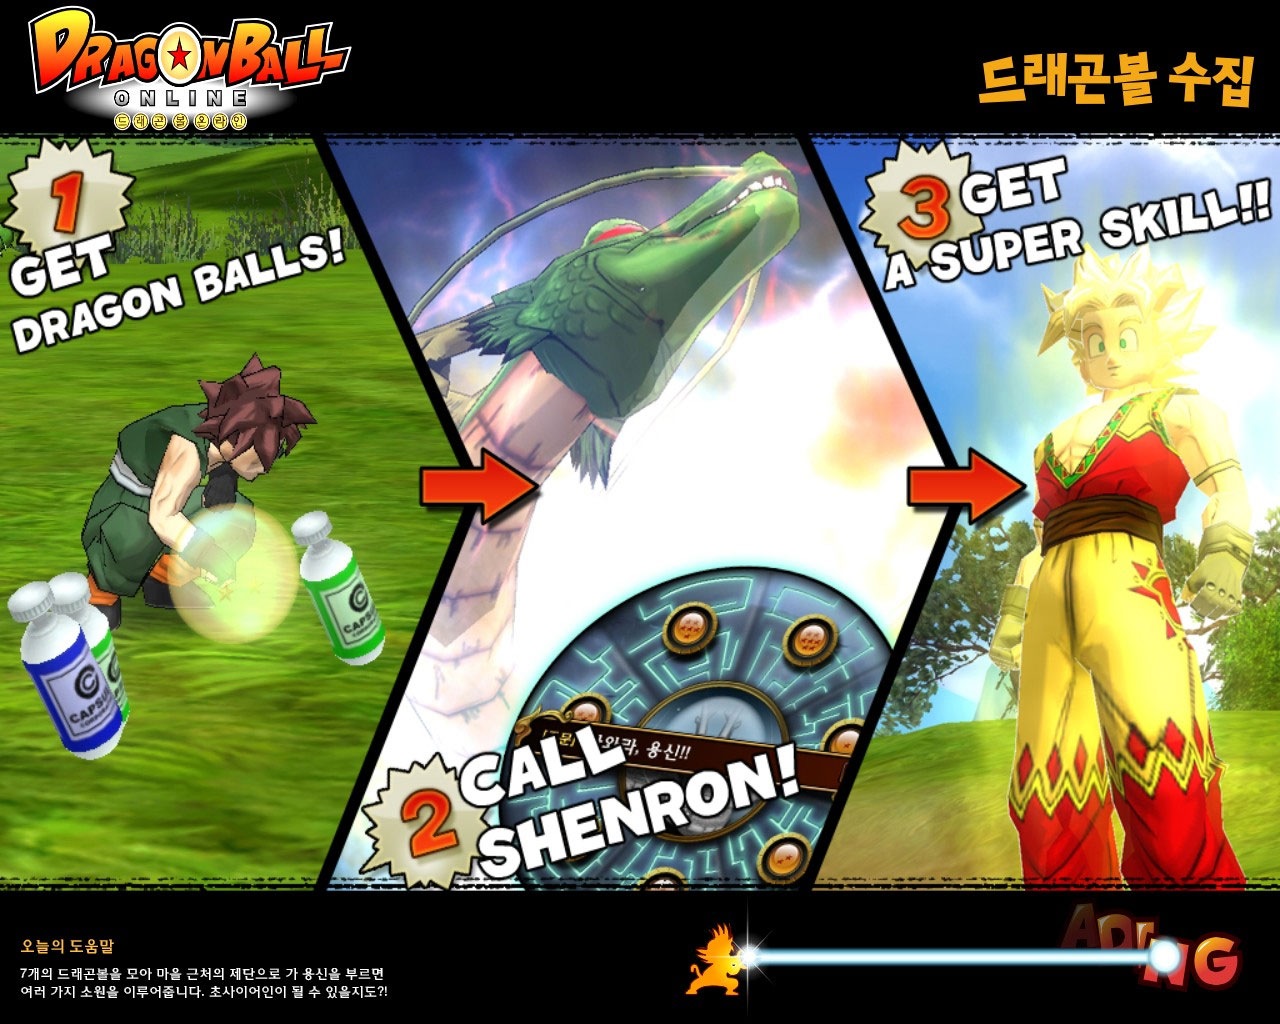 This Summarizes Dragon Ball Online Nicely - Siliconera